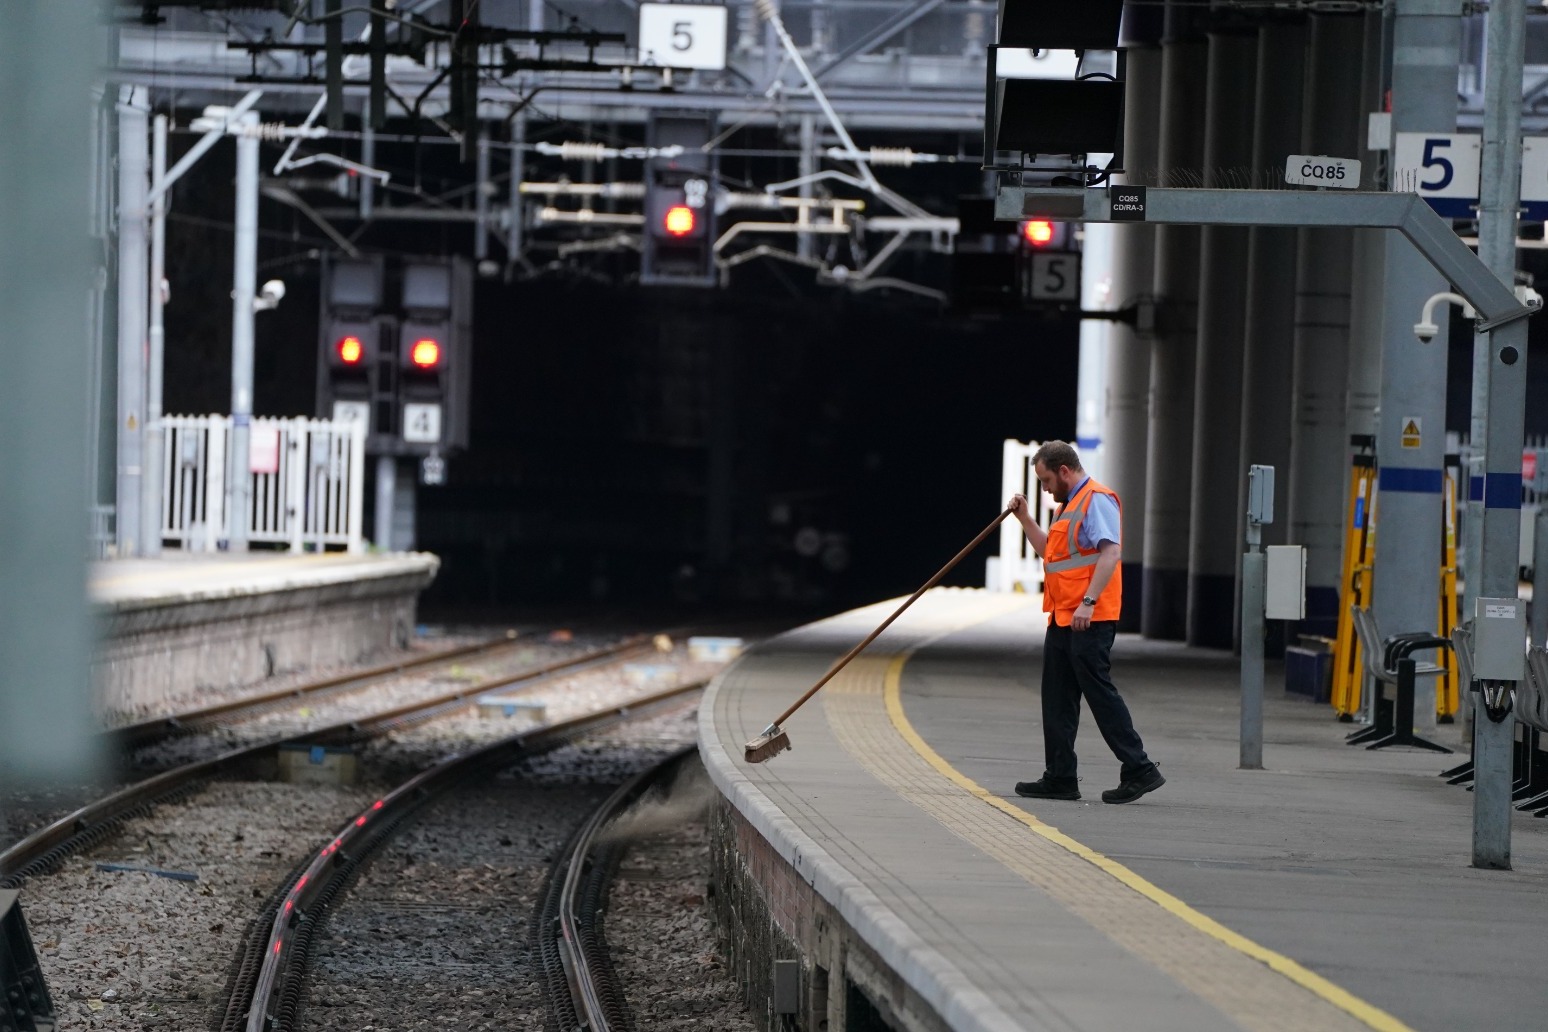 Rail strike causes train chaos and surge in road traffic